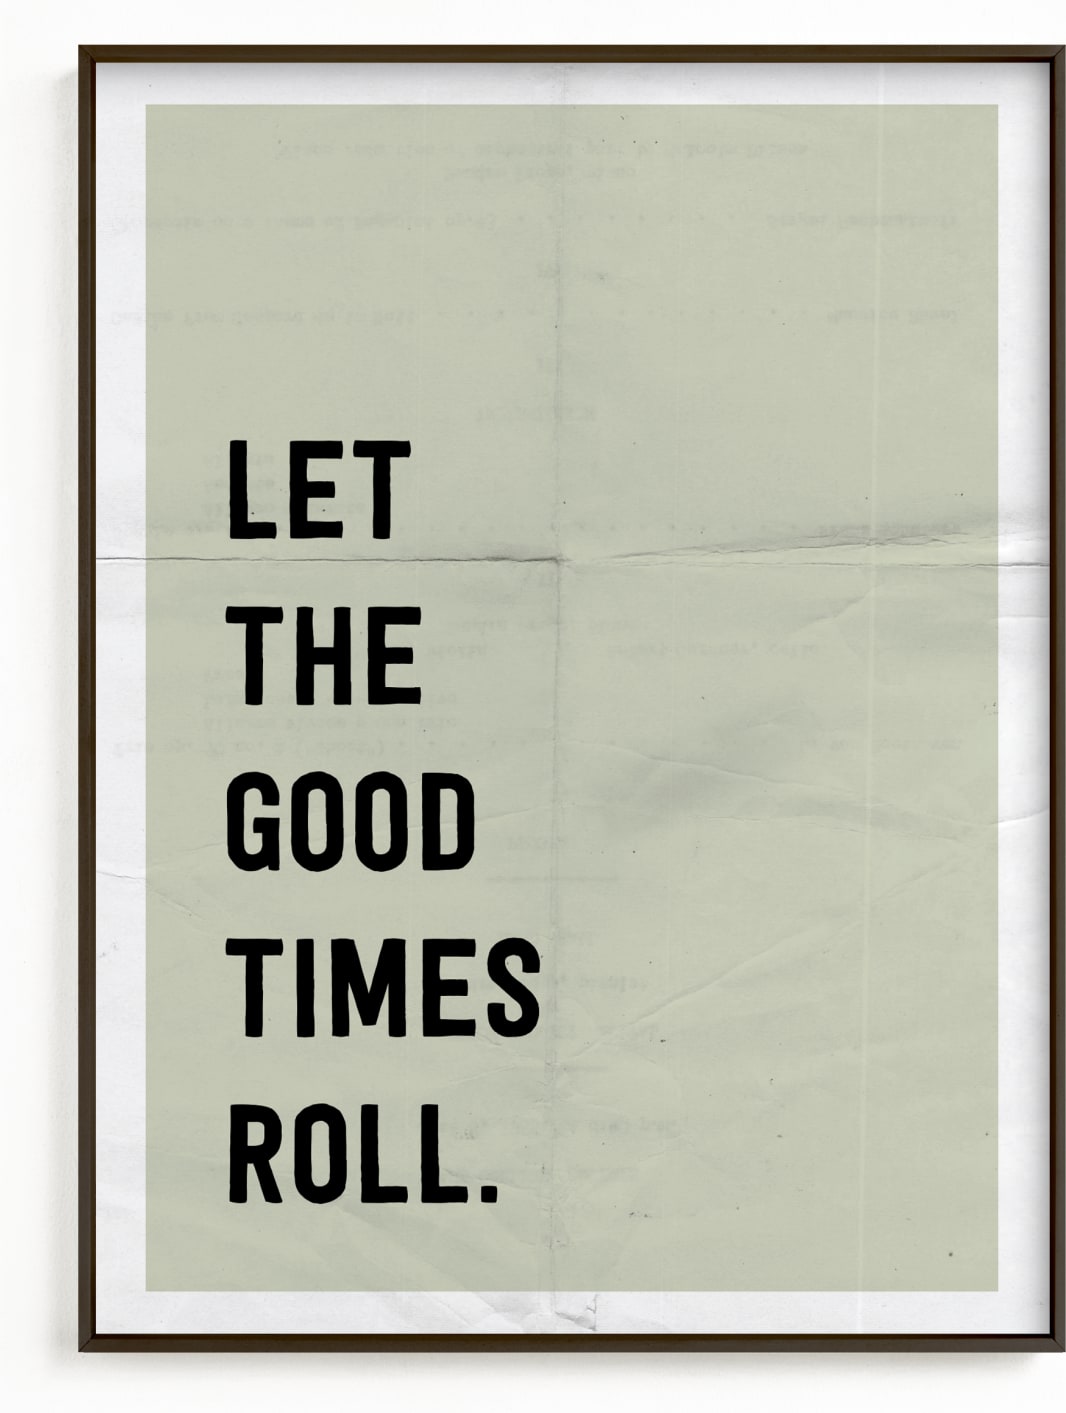 This is a white art by Morgan Kendall called Let the Good Times Roll.